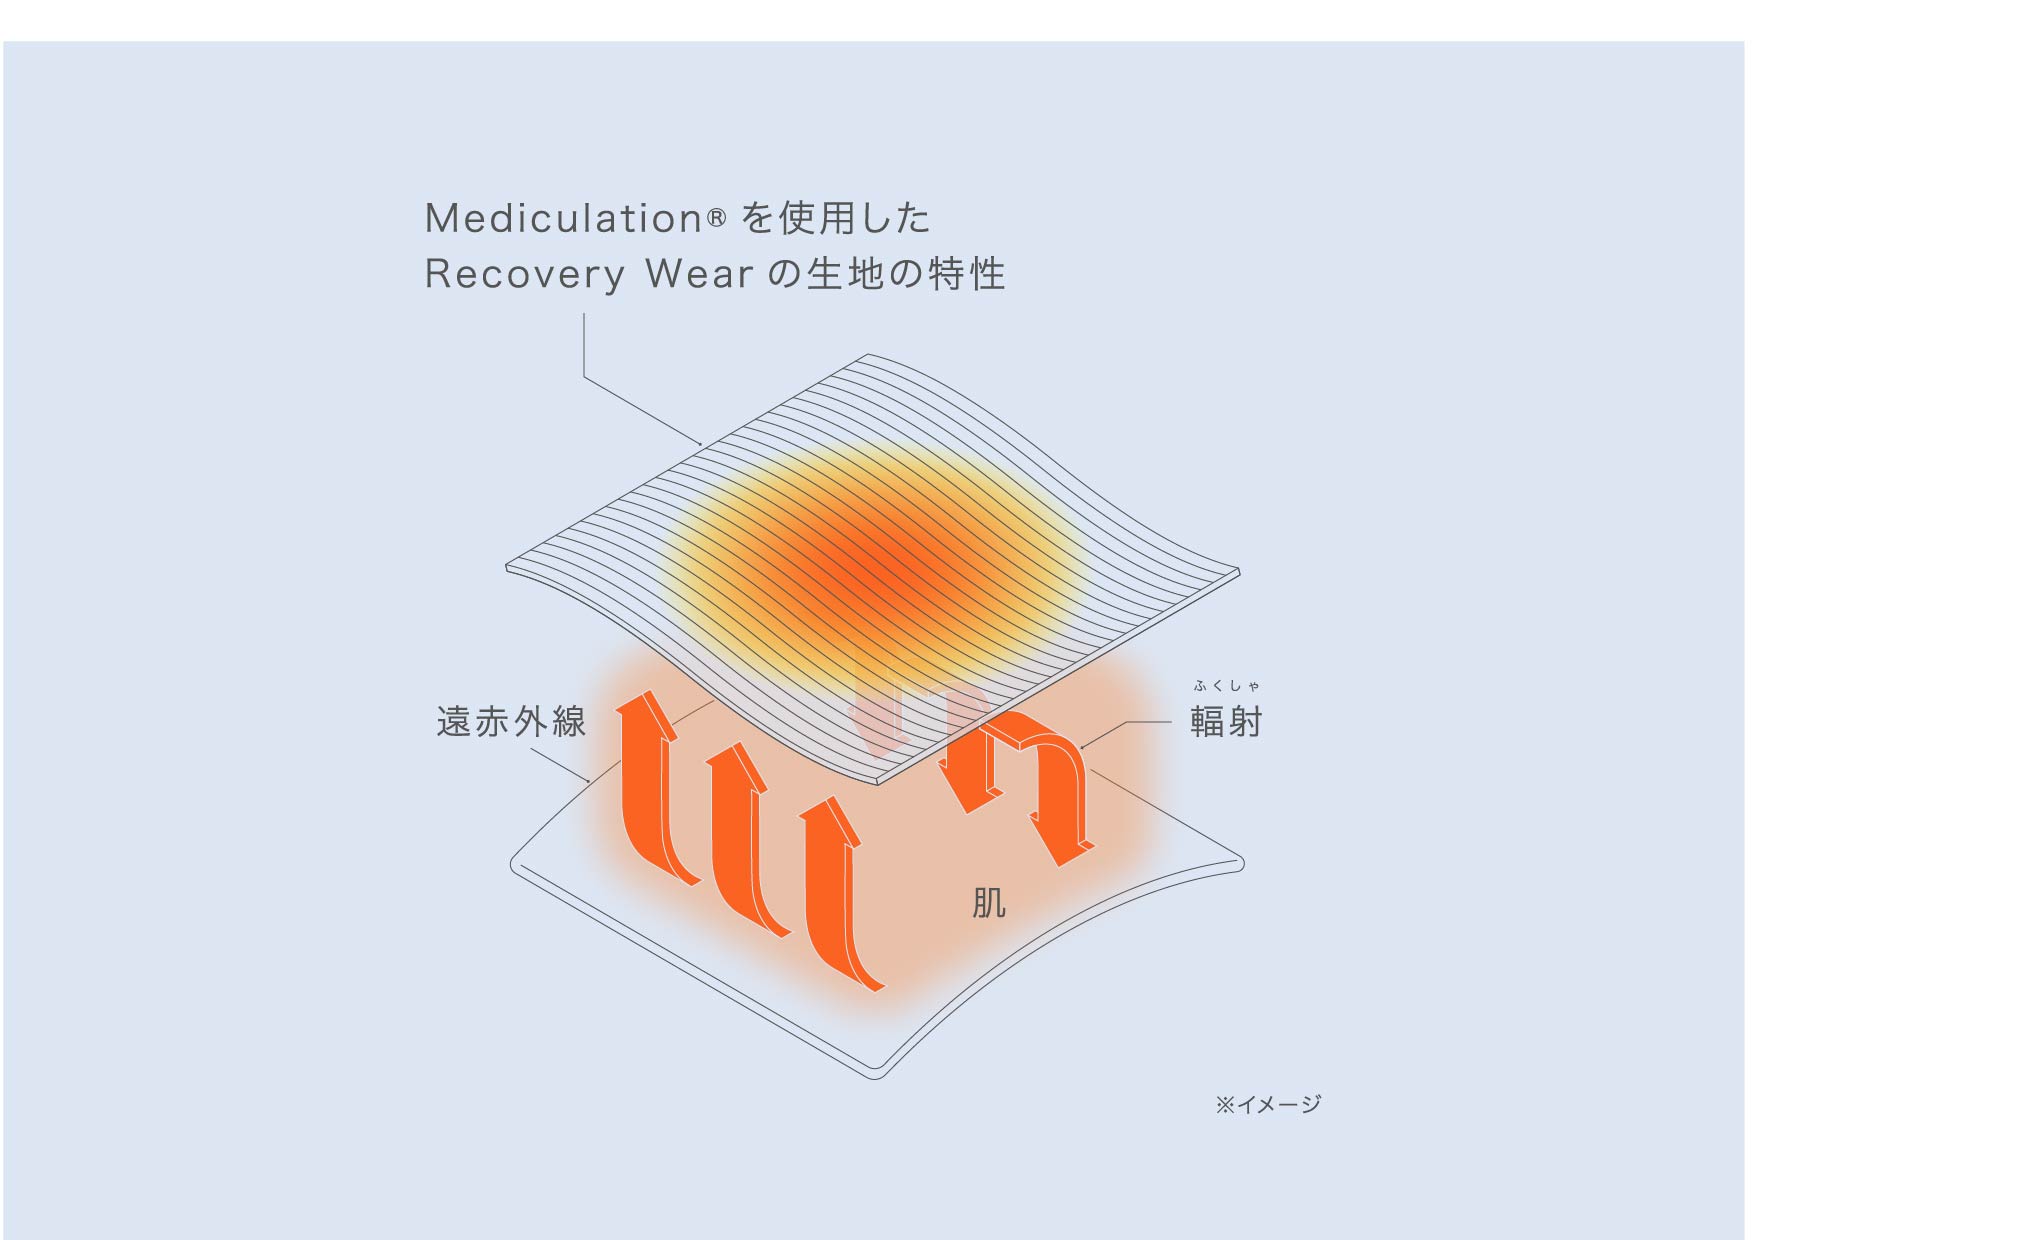 Point1 | Mediculation®を使用したRecovery Wearの生地の特性